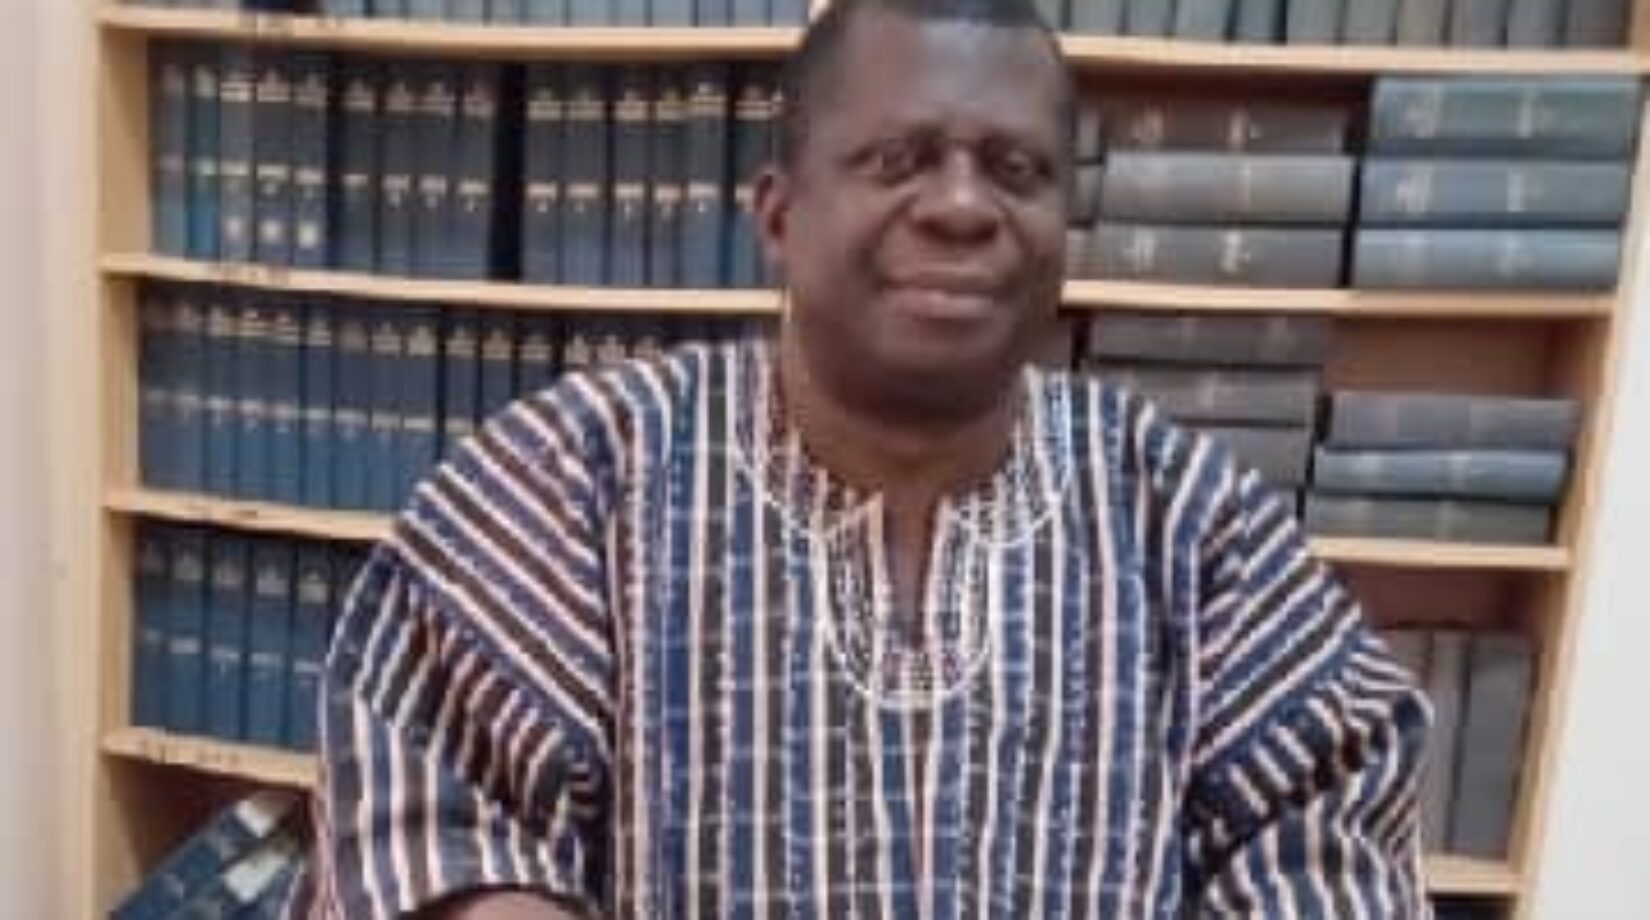 HON.YAW BAAH WRITES:THE CONSTITUTION FROWNS ON BANISHMENT BUT!